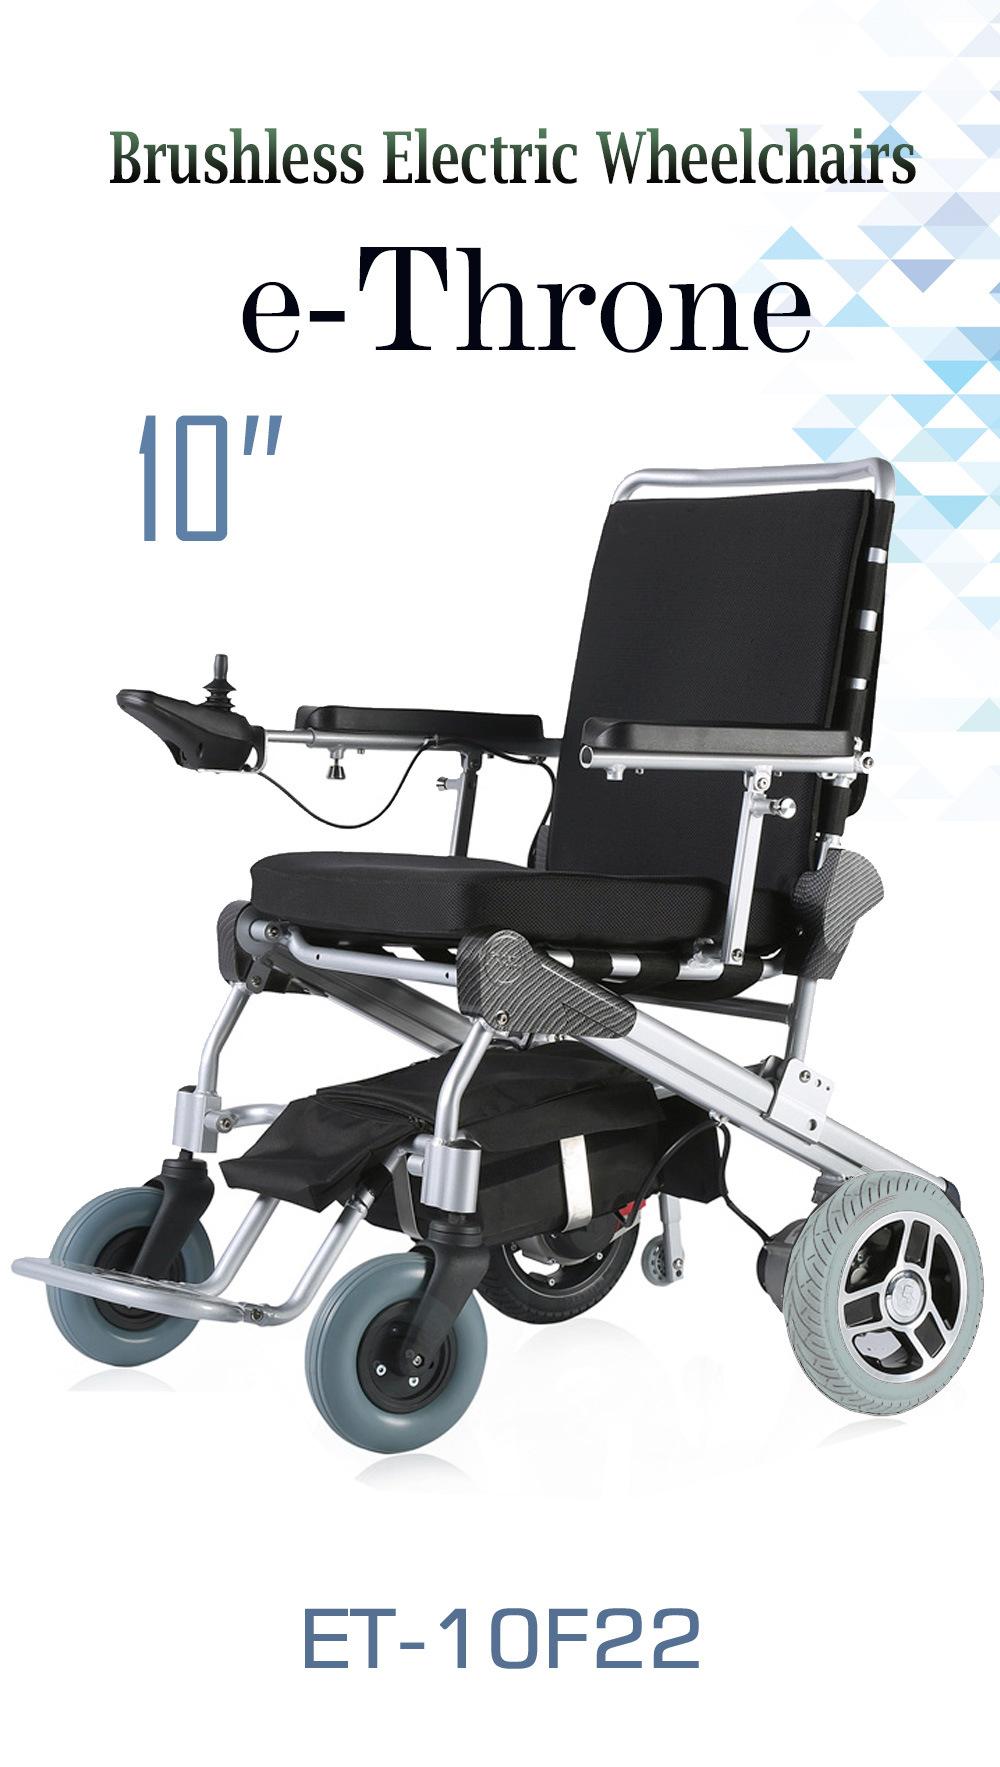 Ultra Strong Fame, Patented Design,East Folding / unfolding, portable and foldable electric mobility wheelchair with 10′′ quick release motors, 15kg only